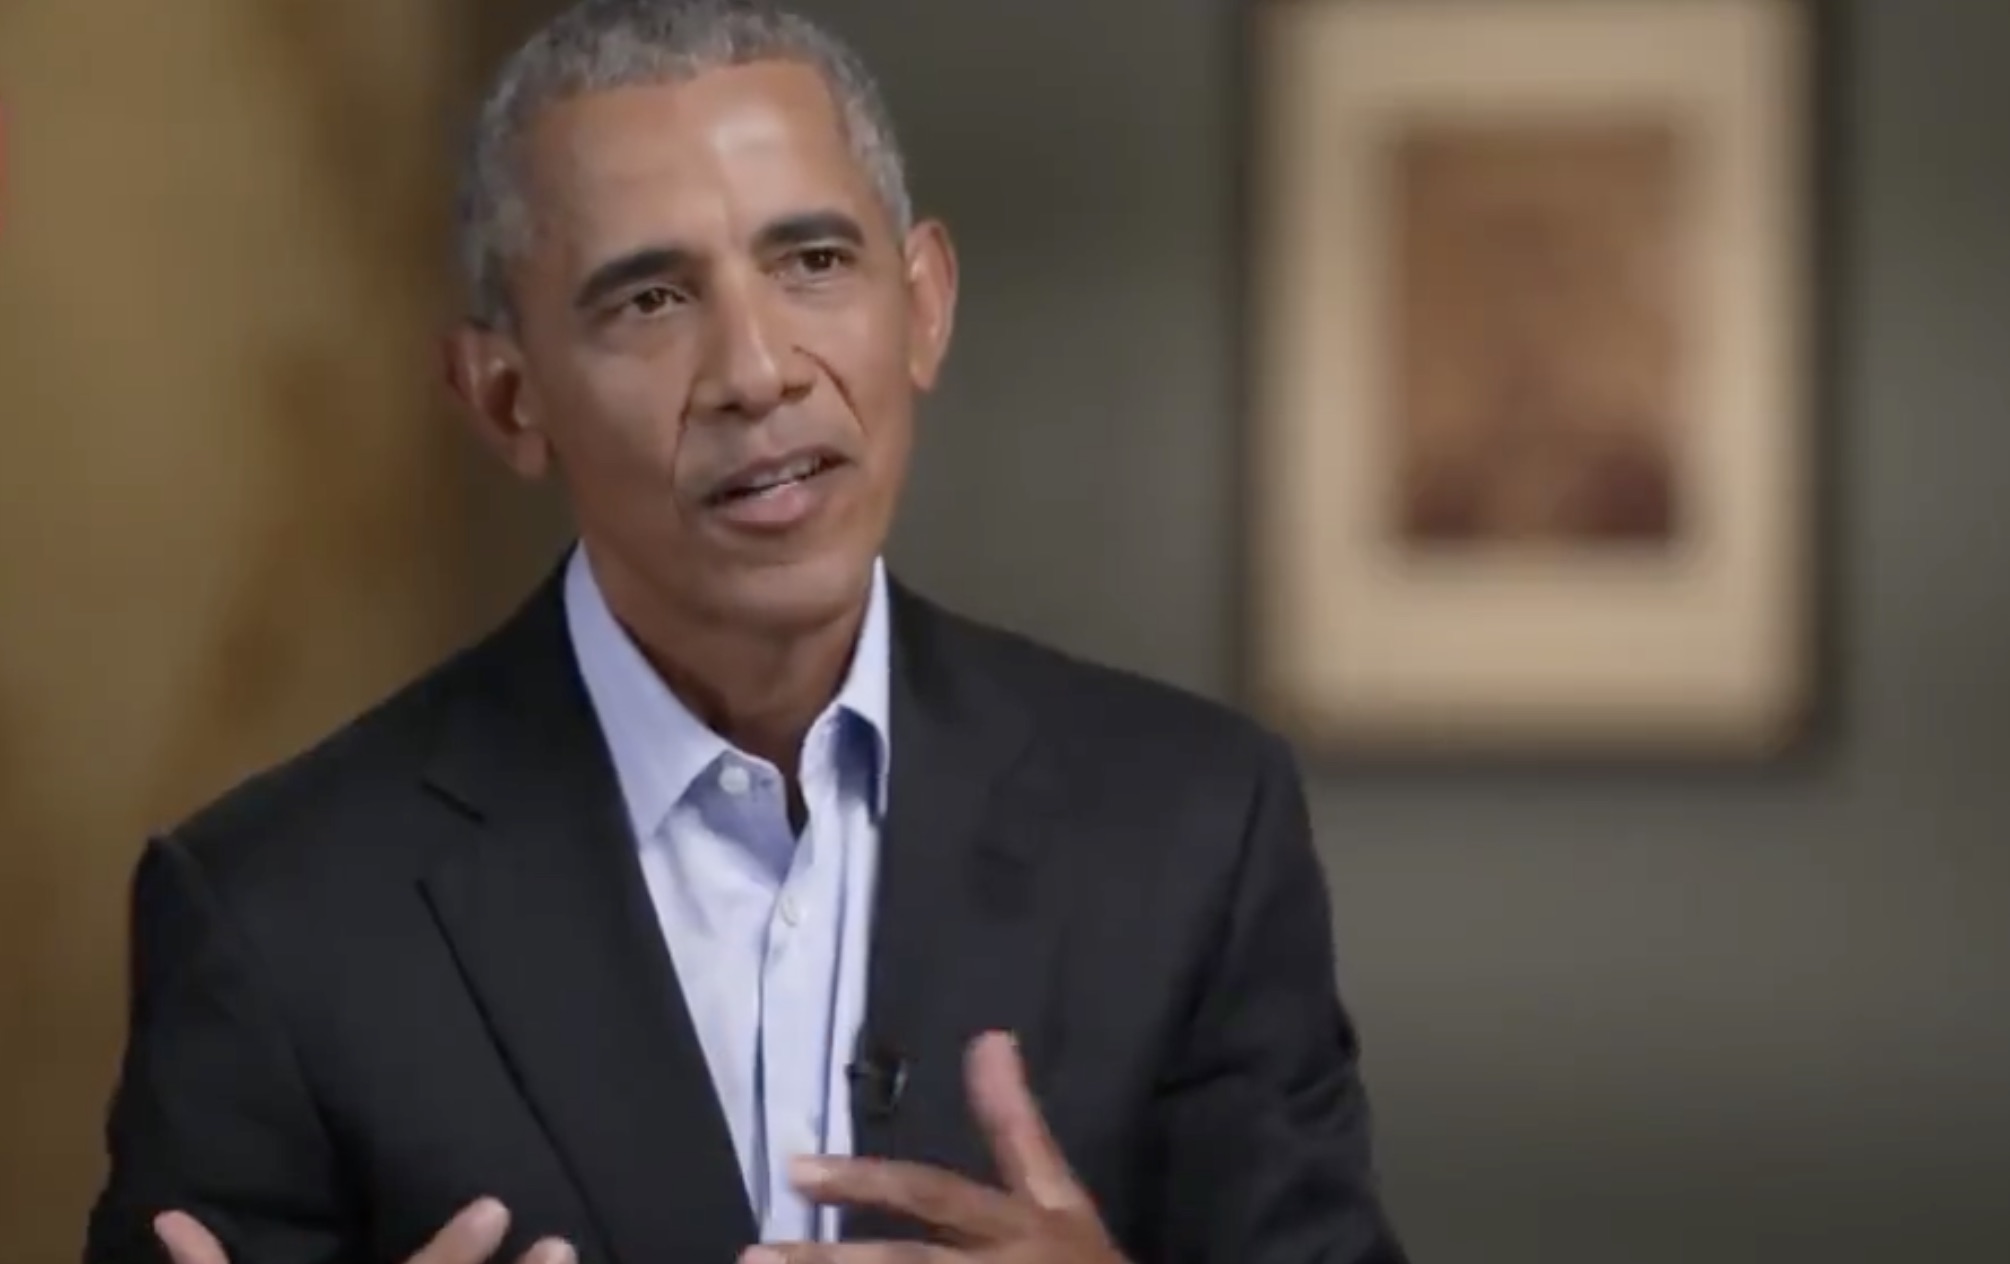 Obama Beautifully Urges Americans To Fight For Criminal Justice Reform After George Floyd Verdict